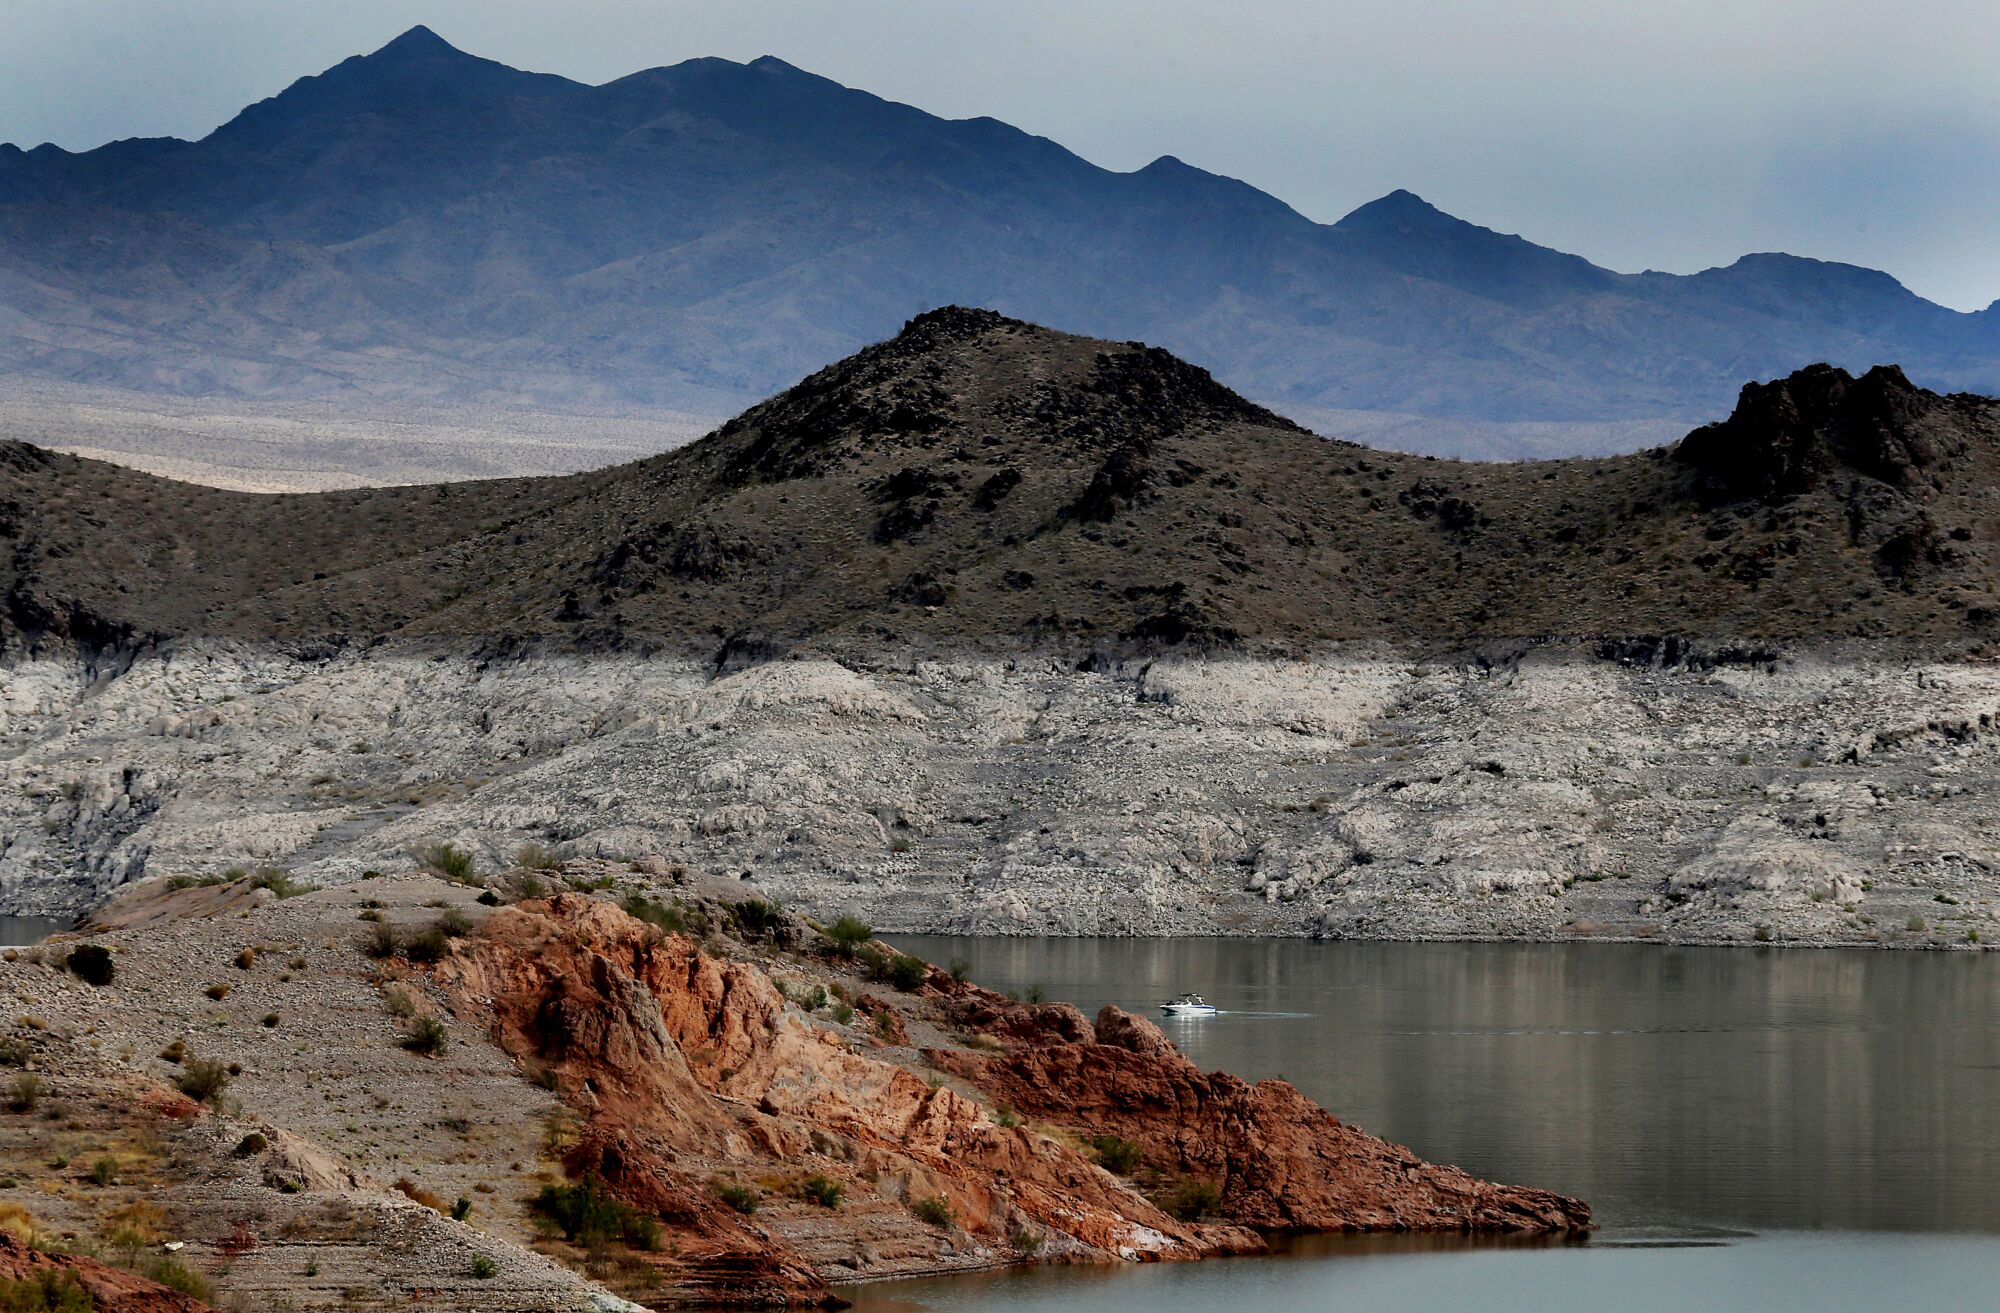 Boaters navigate Lake Mead, the largest reservoir in the United States